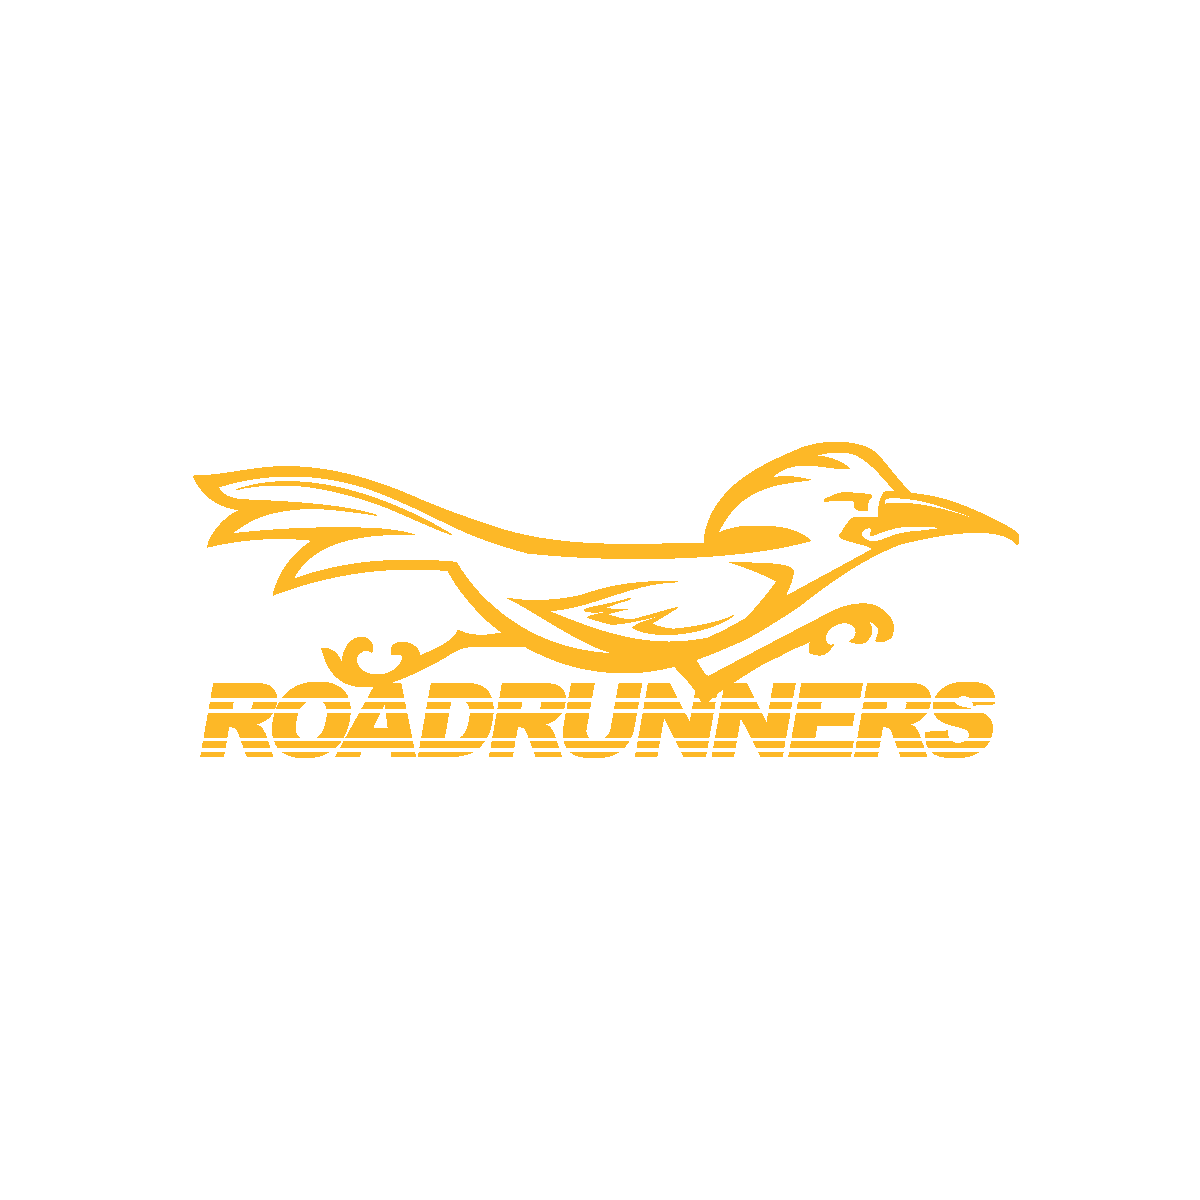 Athletics mascot with the word "Roadrunner" - yellow